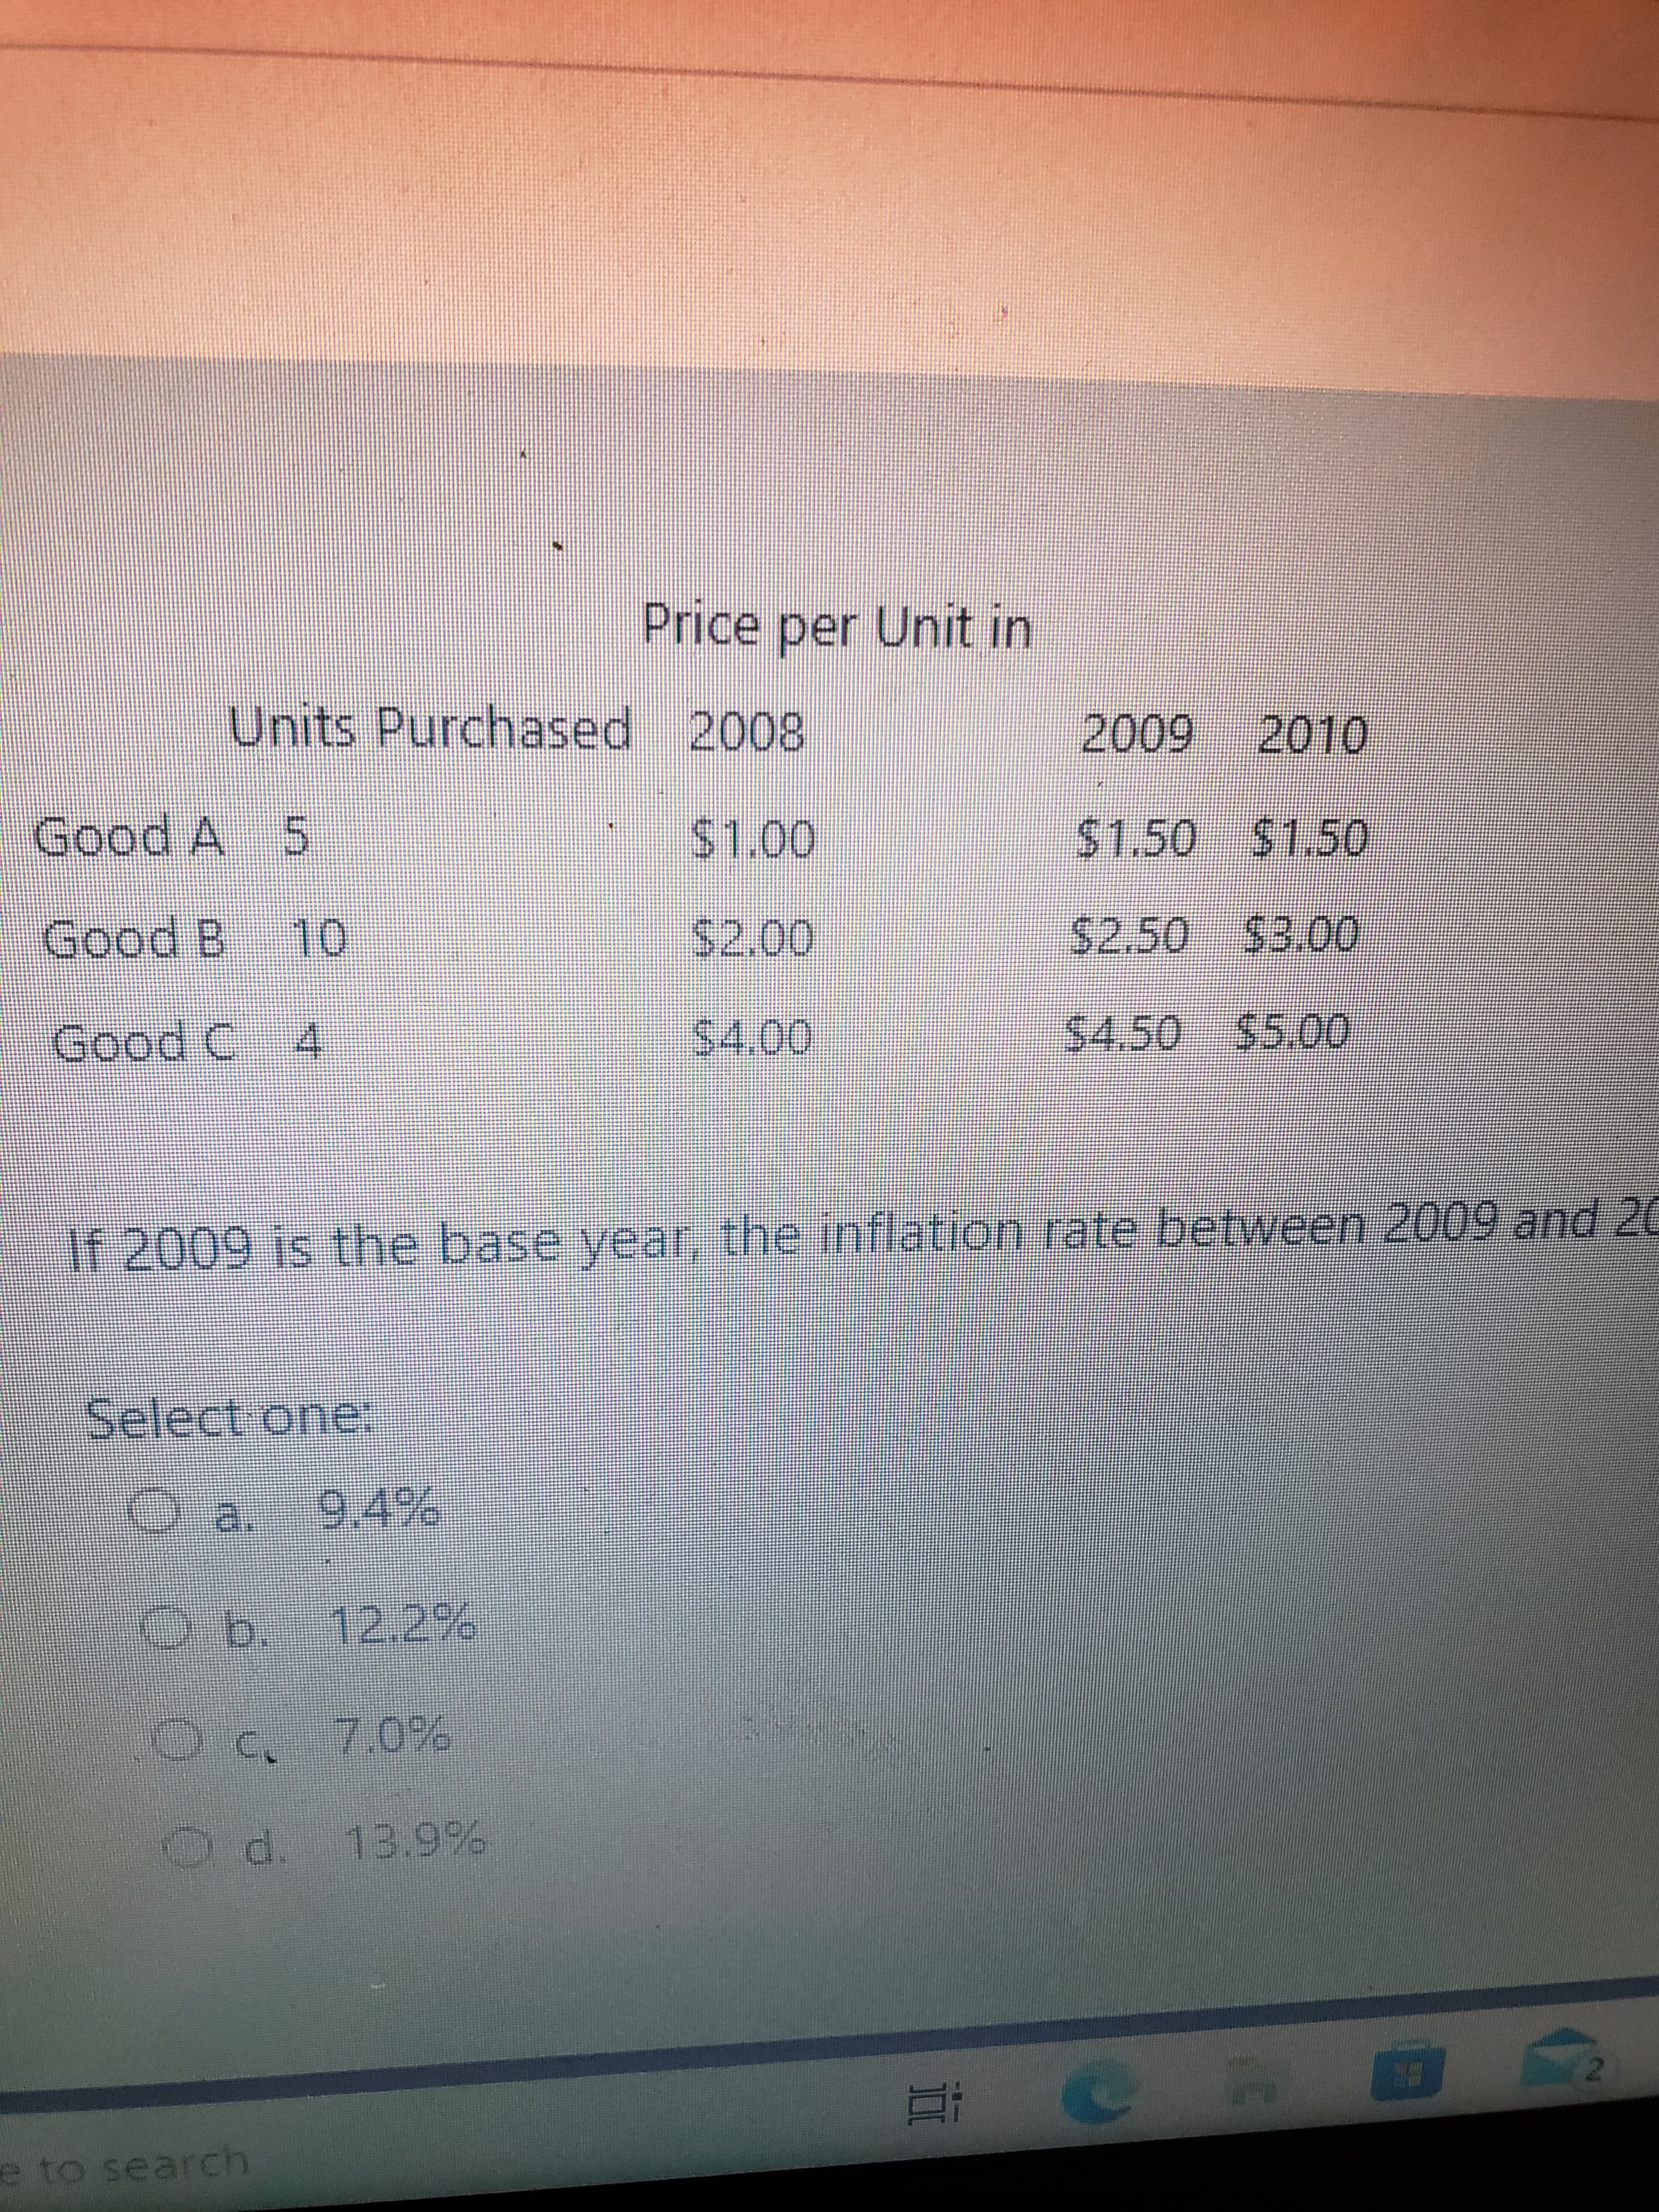 Price per Unit in
Units Purchased 2008
5.
Good A
Good B 10
$2.50 $3.00
Good C 4
S4.50 $5.00
If 2009 is the base year, the inflation rate between 2009 and 20
Select one:
Oa. 9.4%
Ob. 12.29%
7.0%
13.9%
2.
e to search
